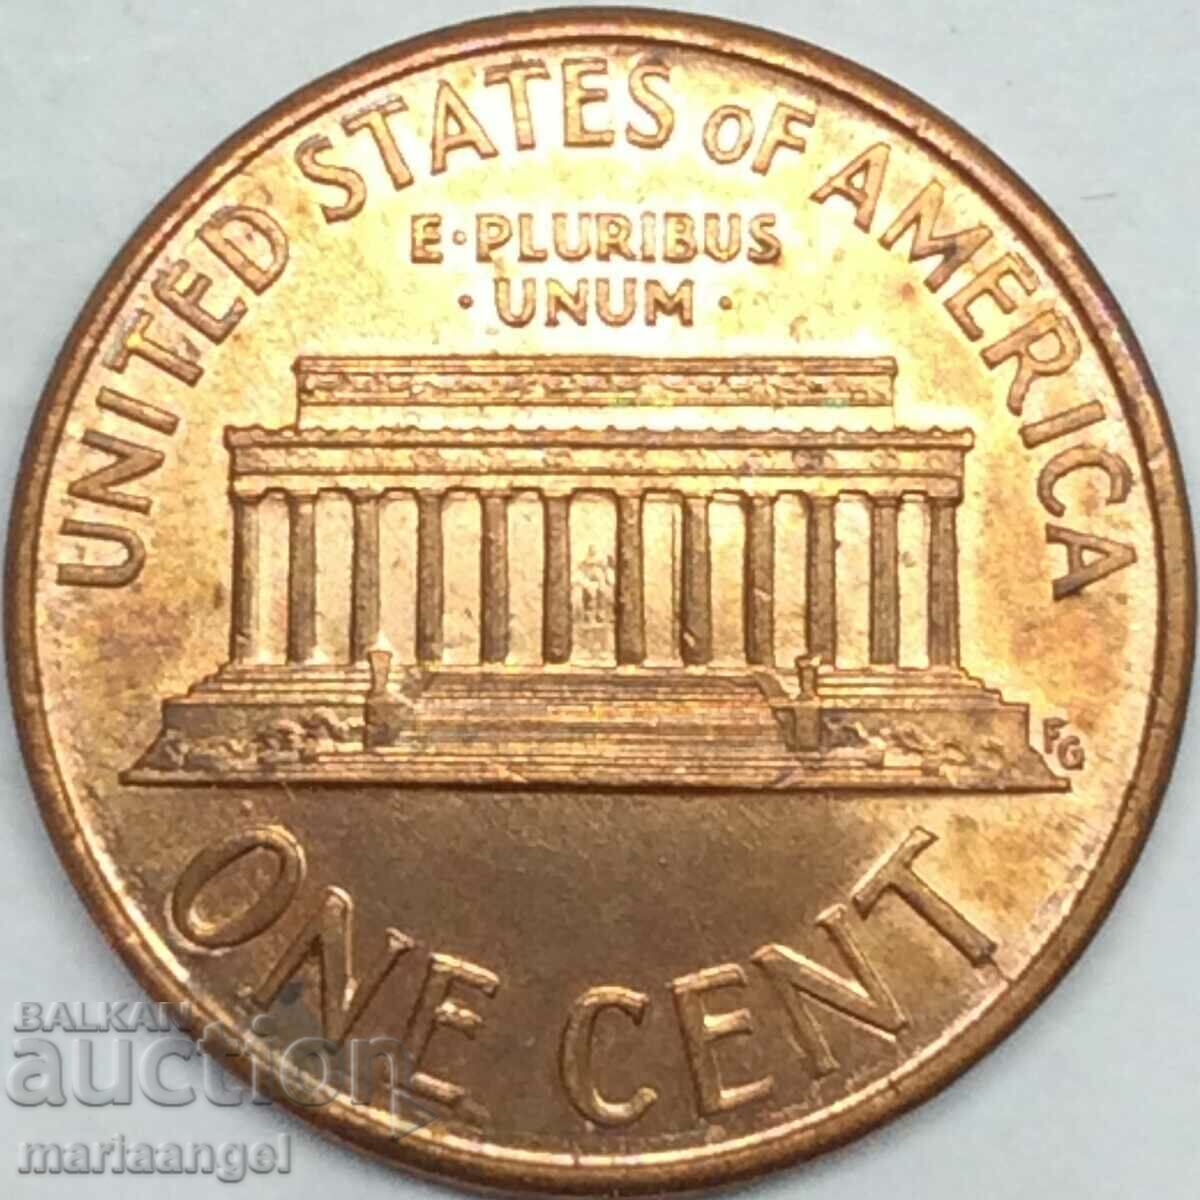 1 cent 1990 USA President Lincoln and his center